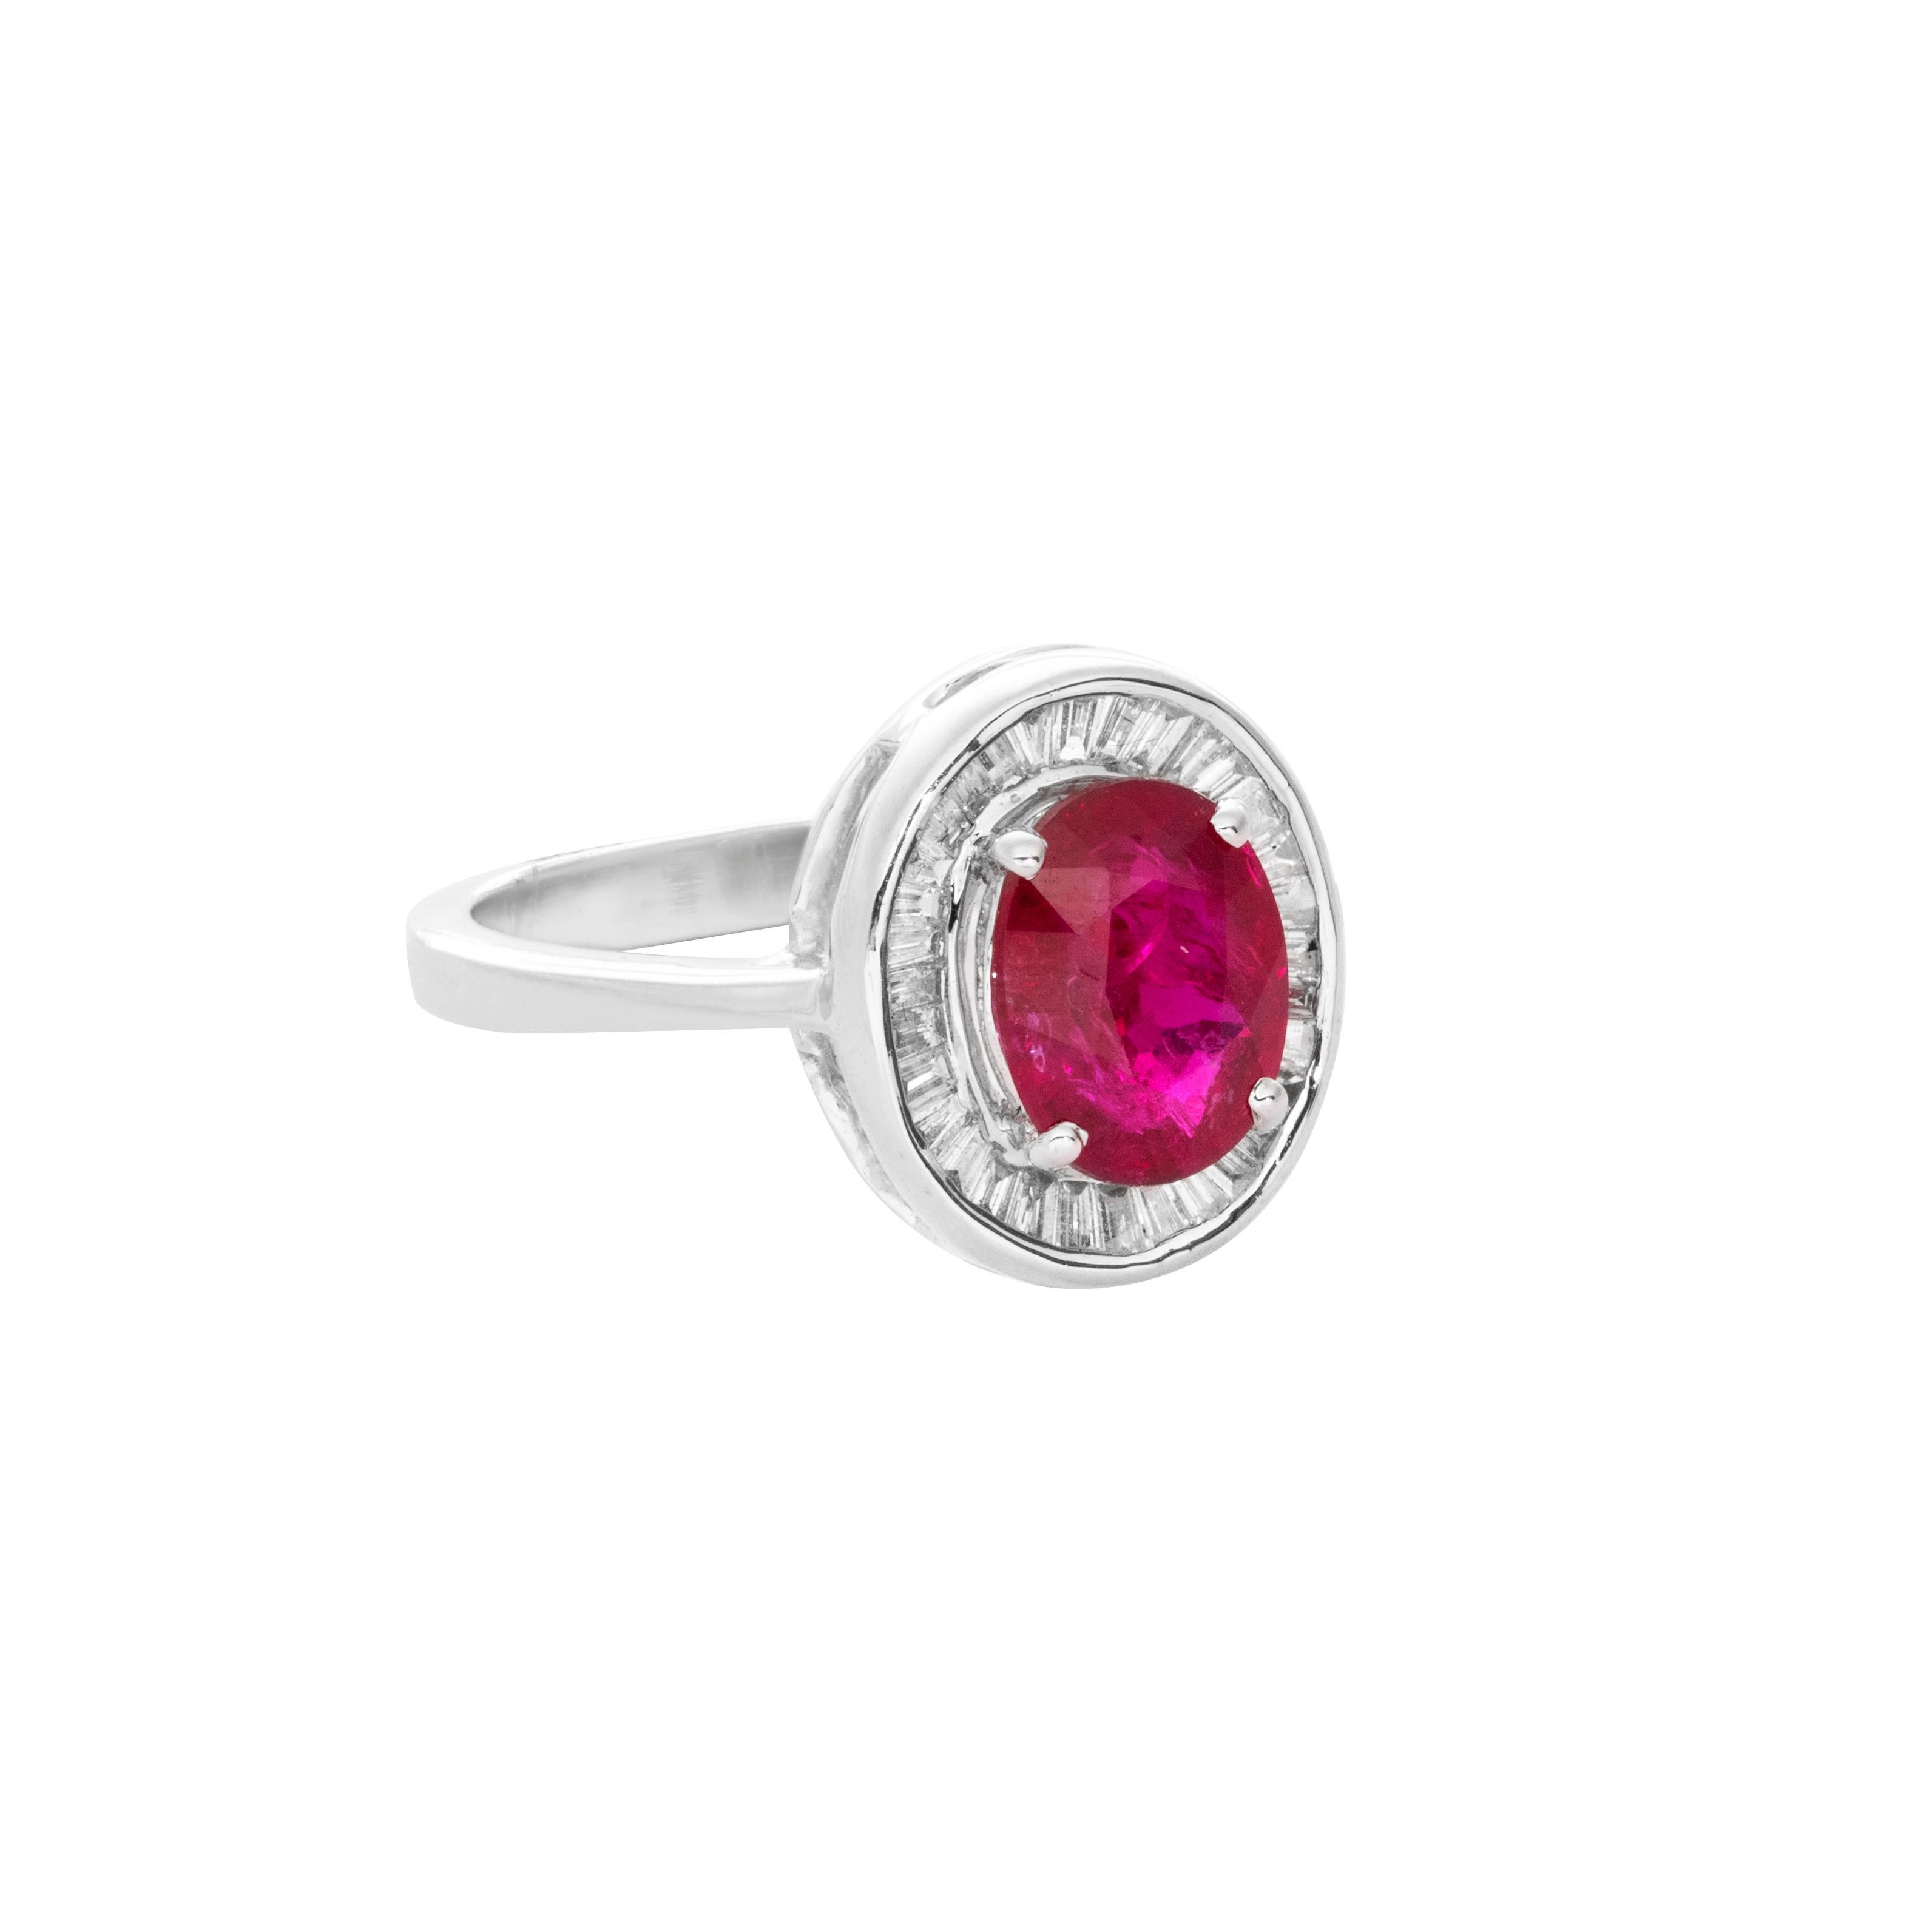 18 Karat White Gold Ruby Baguette Diamond Cocktail Ring

Elegant and delicate, this beautiful cocktail ring set in 18 Karat white gold studded with a beautiful ruby and baguette diamonds is ideal for evening wear.

We will provide an IGI diamond